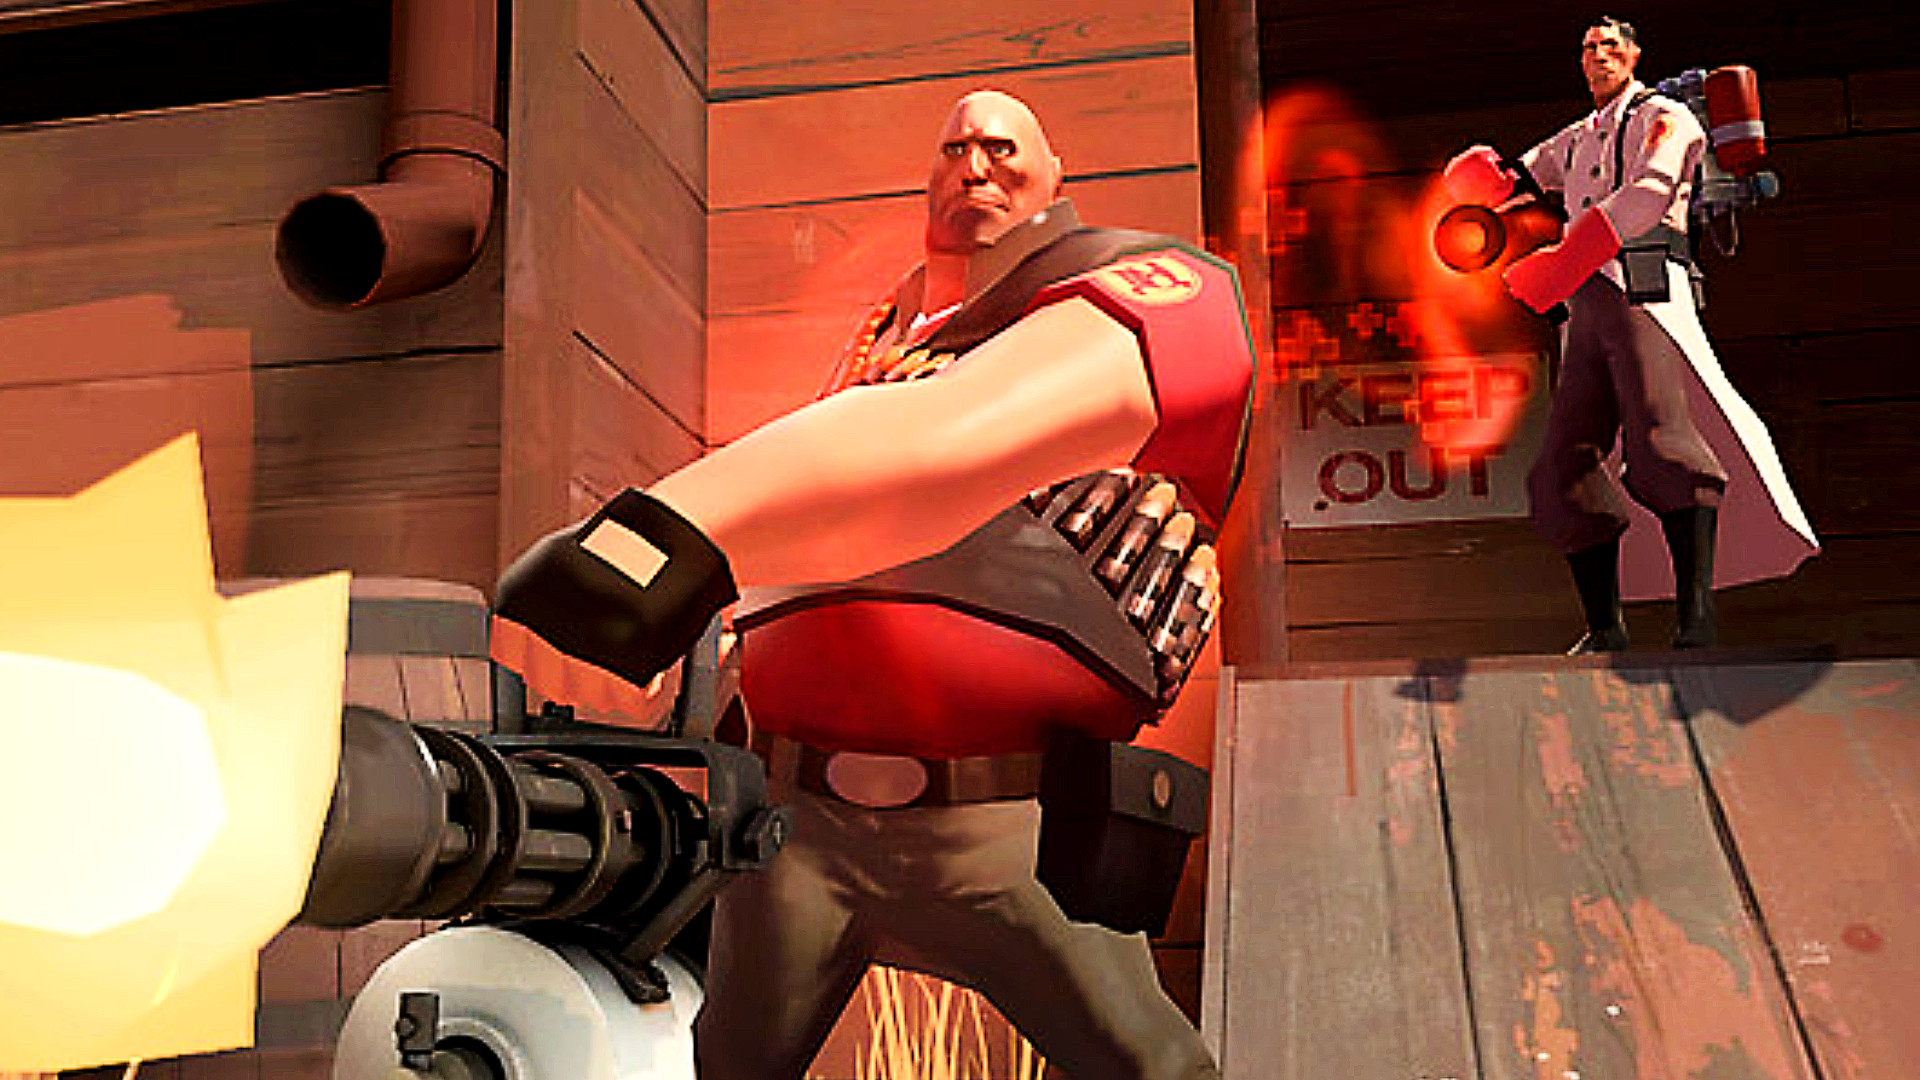 Valve responds to Team Fortress 2 fans' #SaveTF2 campaign